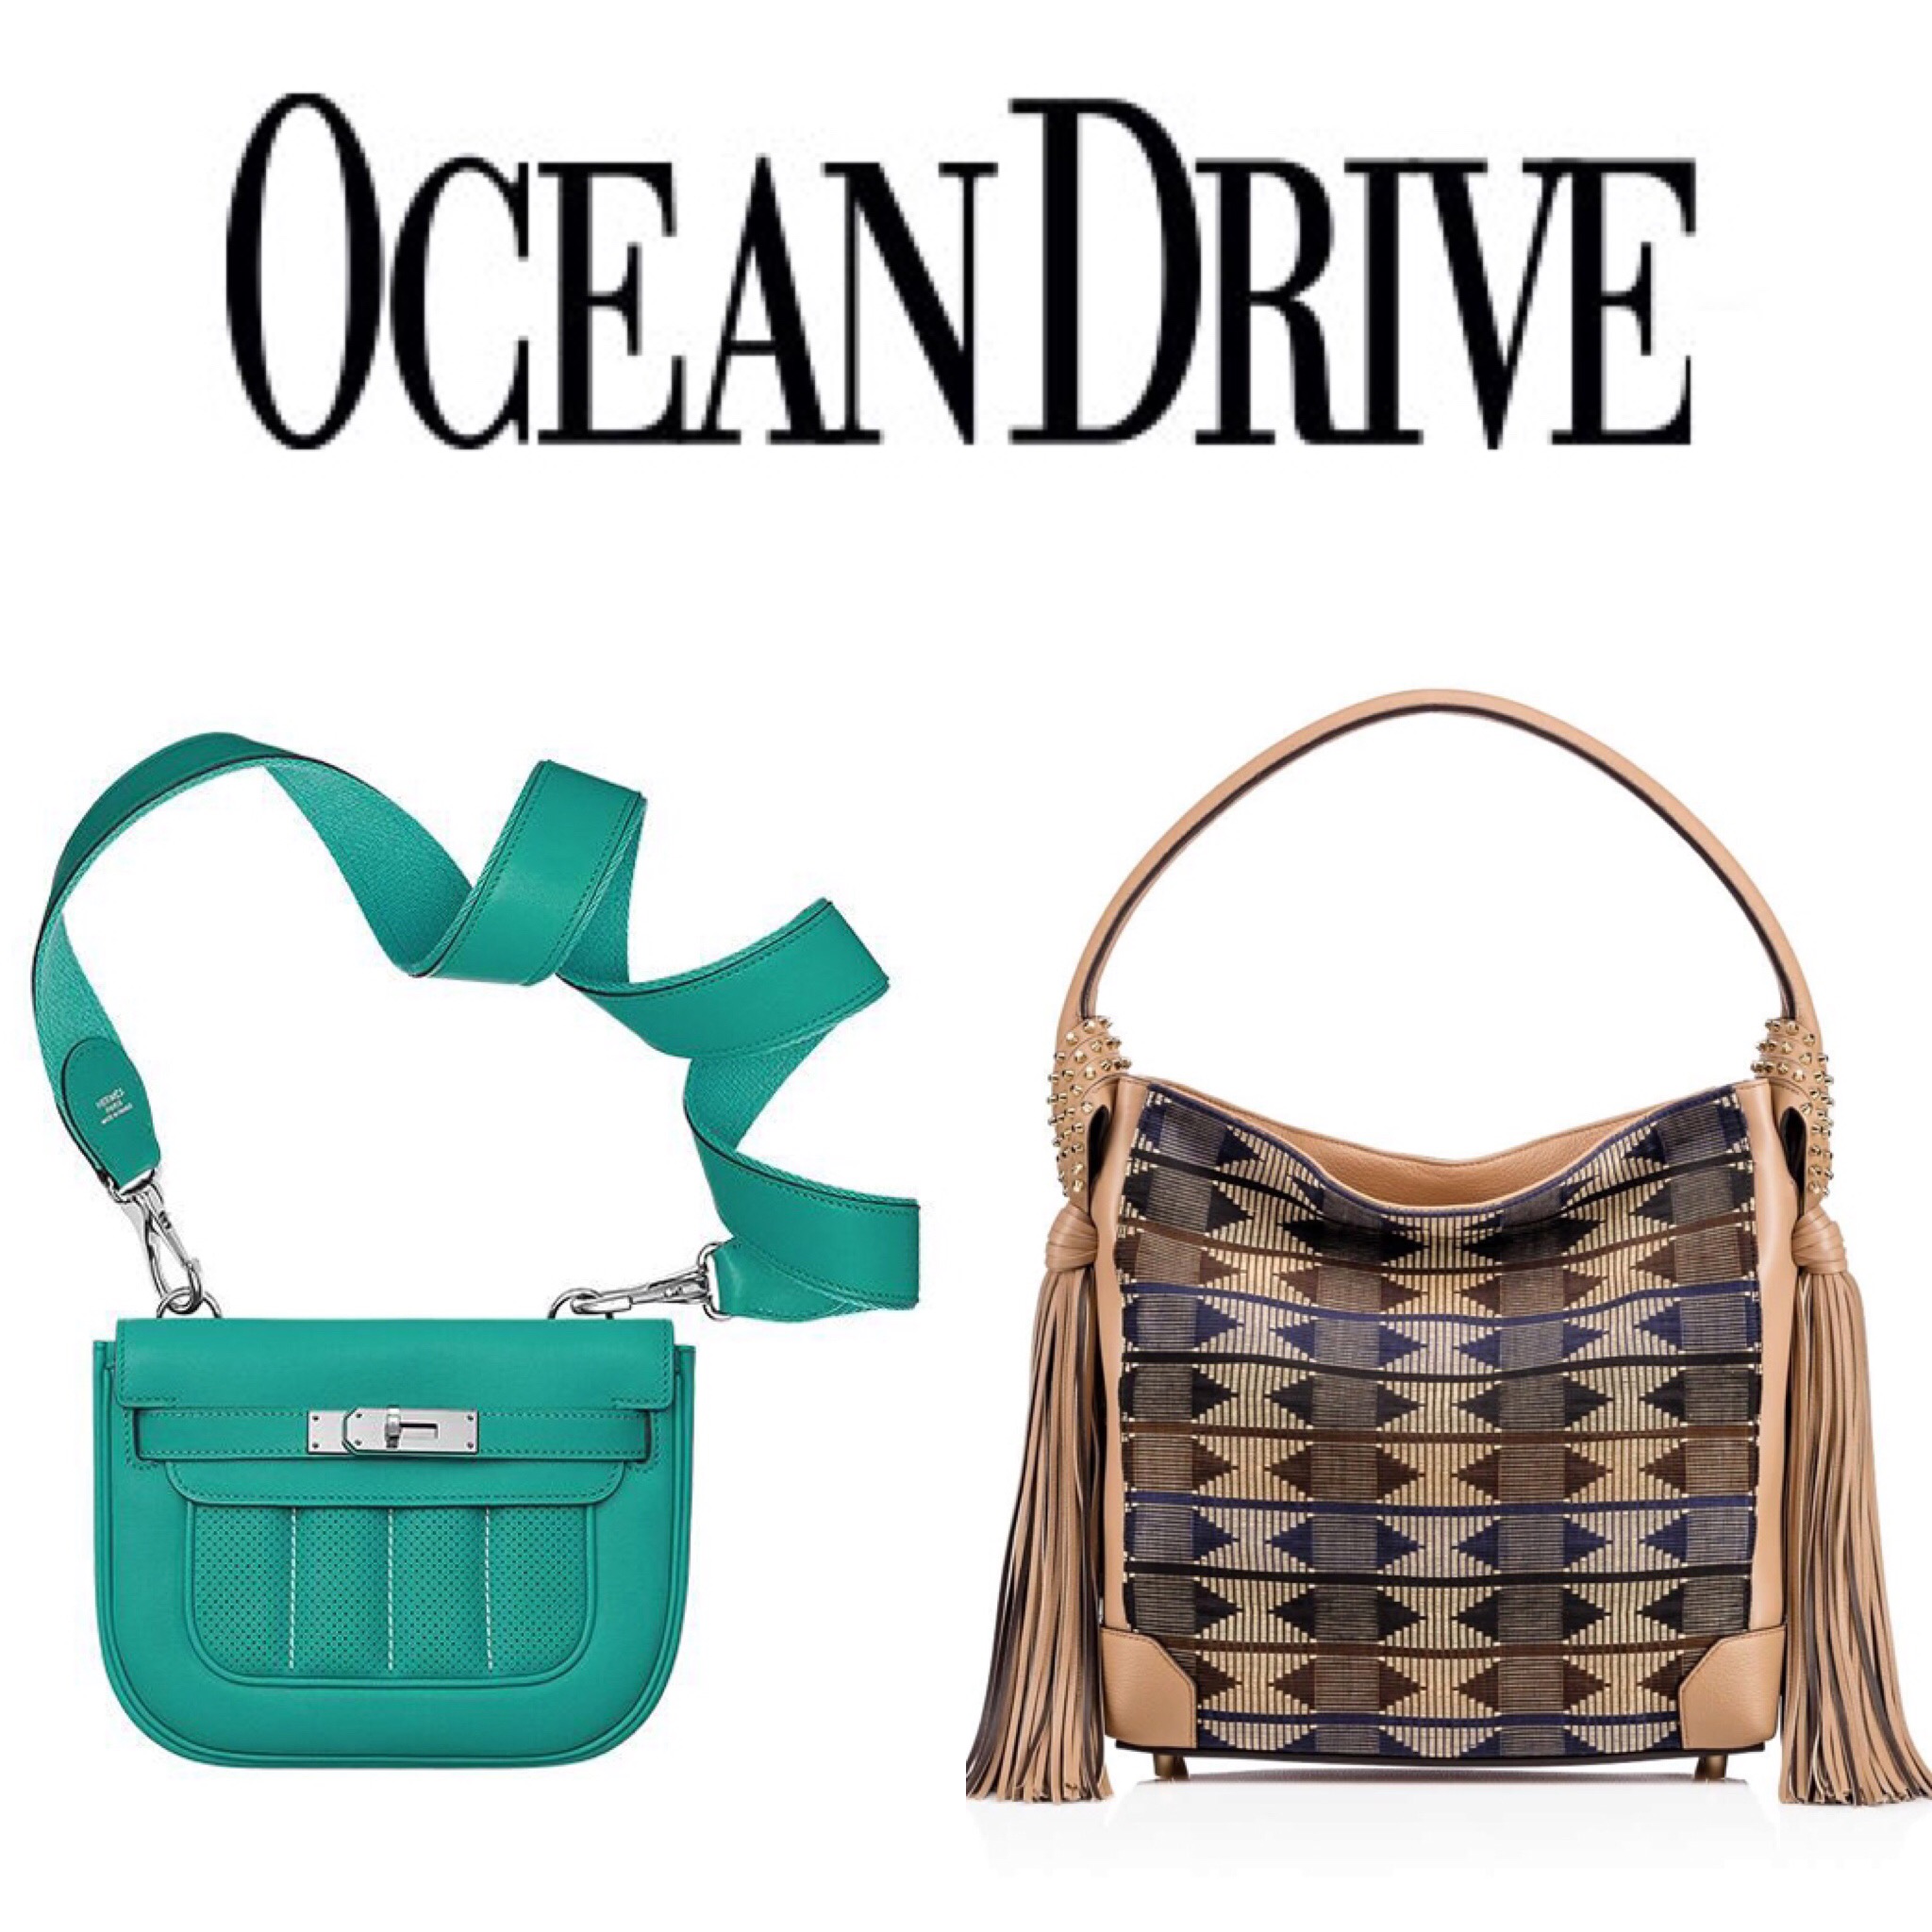  https://oceandrive.com/gorgeous-daytime-bags-for-every-miami-occasion 